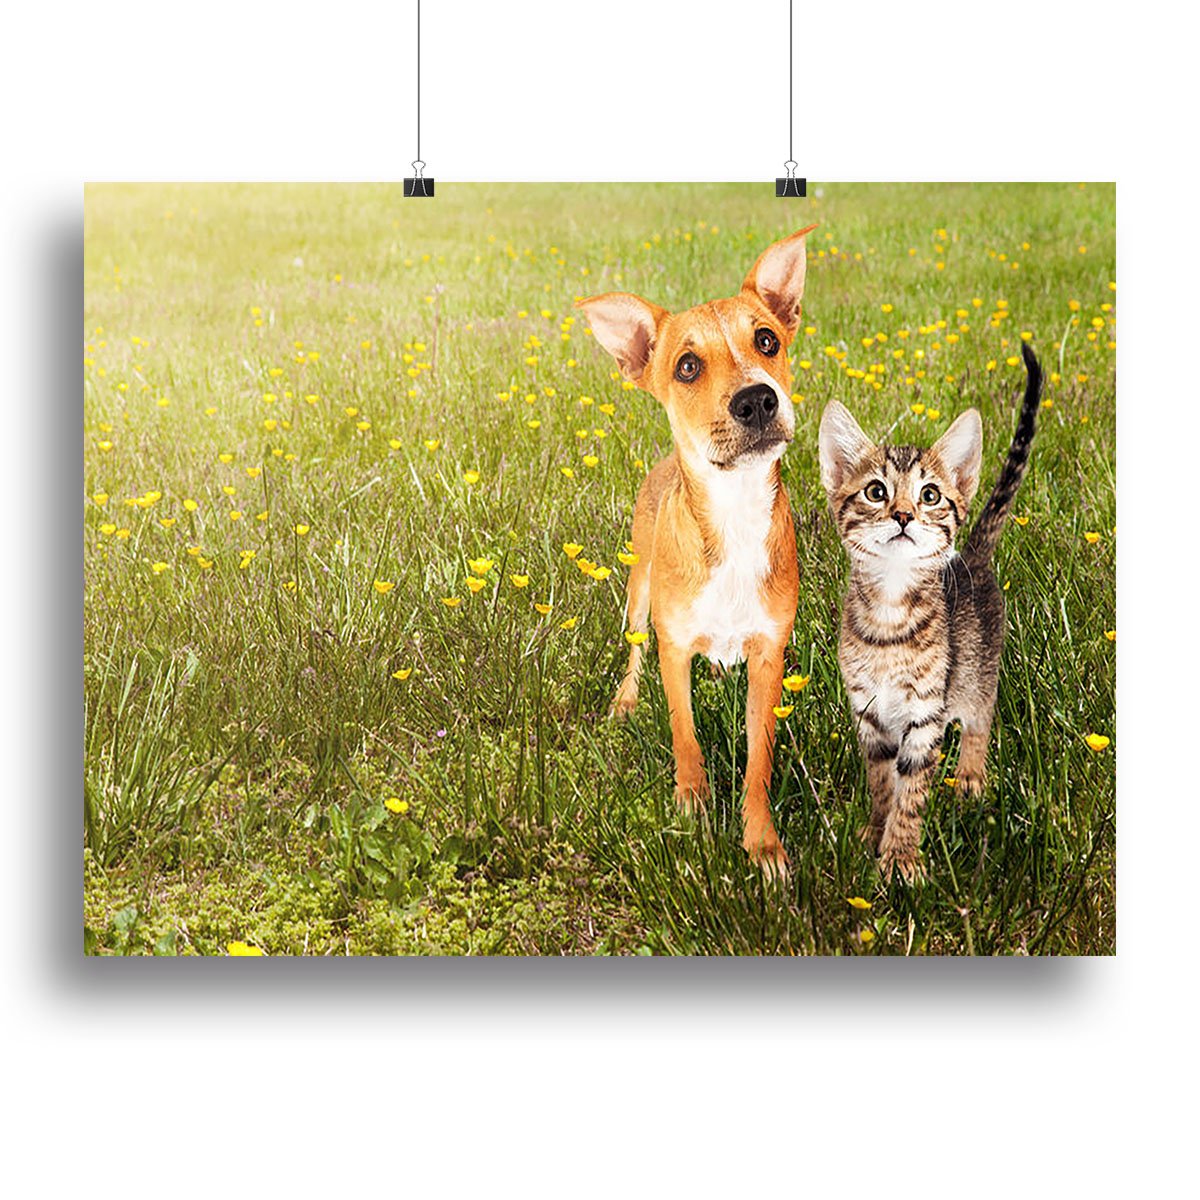 Cute kitten and puppy together in a field Canvas Print or Poster